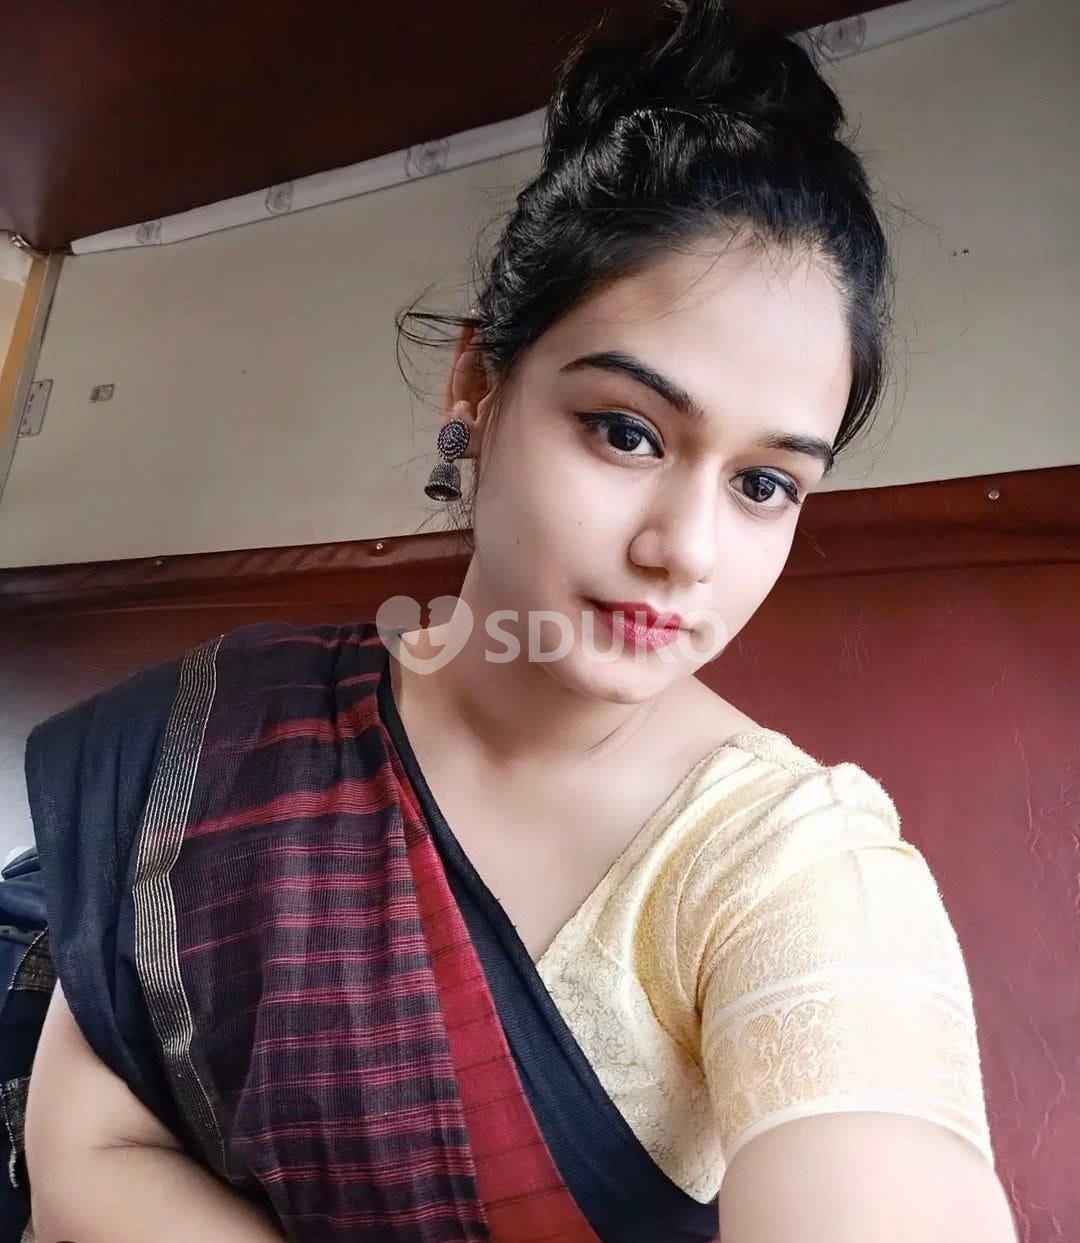 TAMBARAM(CHENNAI) VIP📞BEST HIGH PROFILE CALL GIRL FOR SEX AND SATISFACTION CALL ME NOW 📞